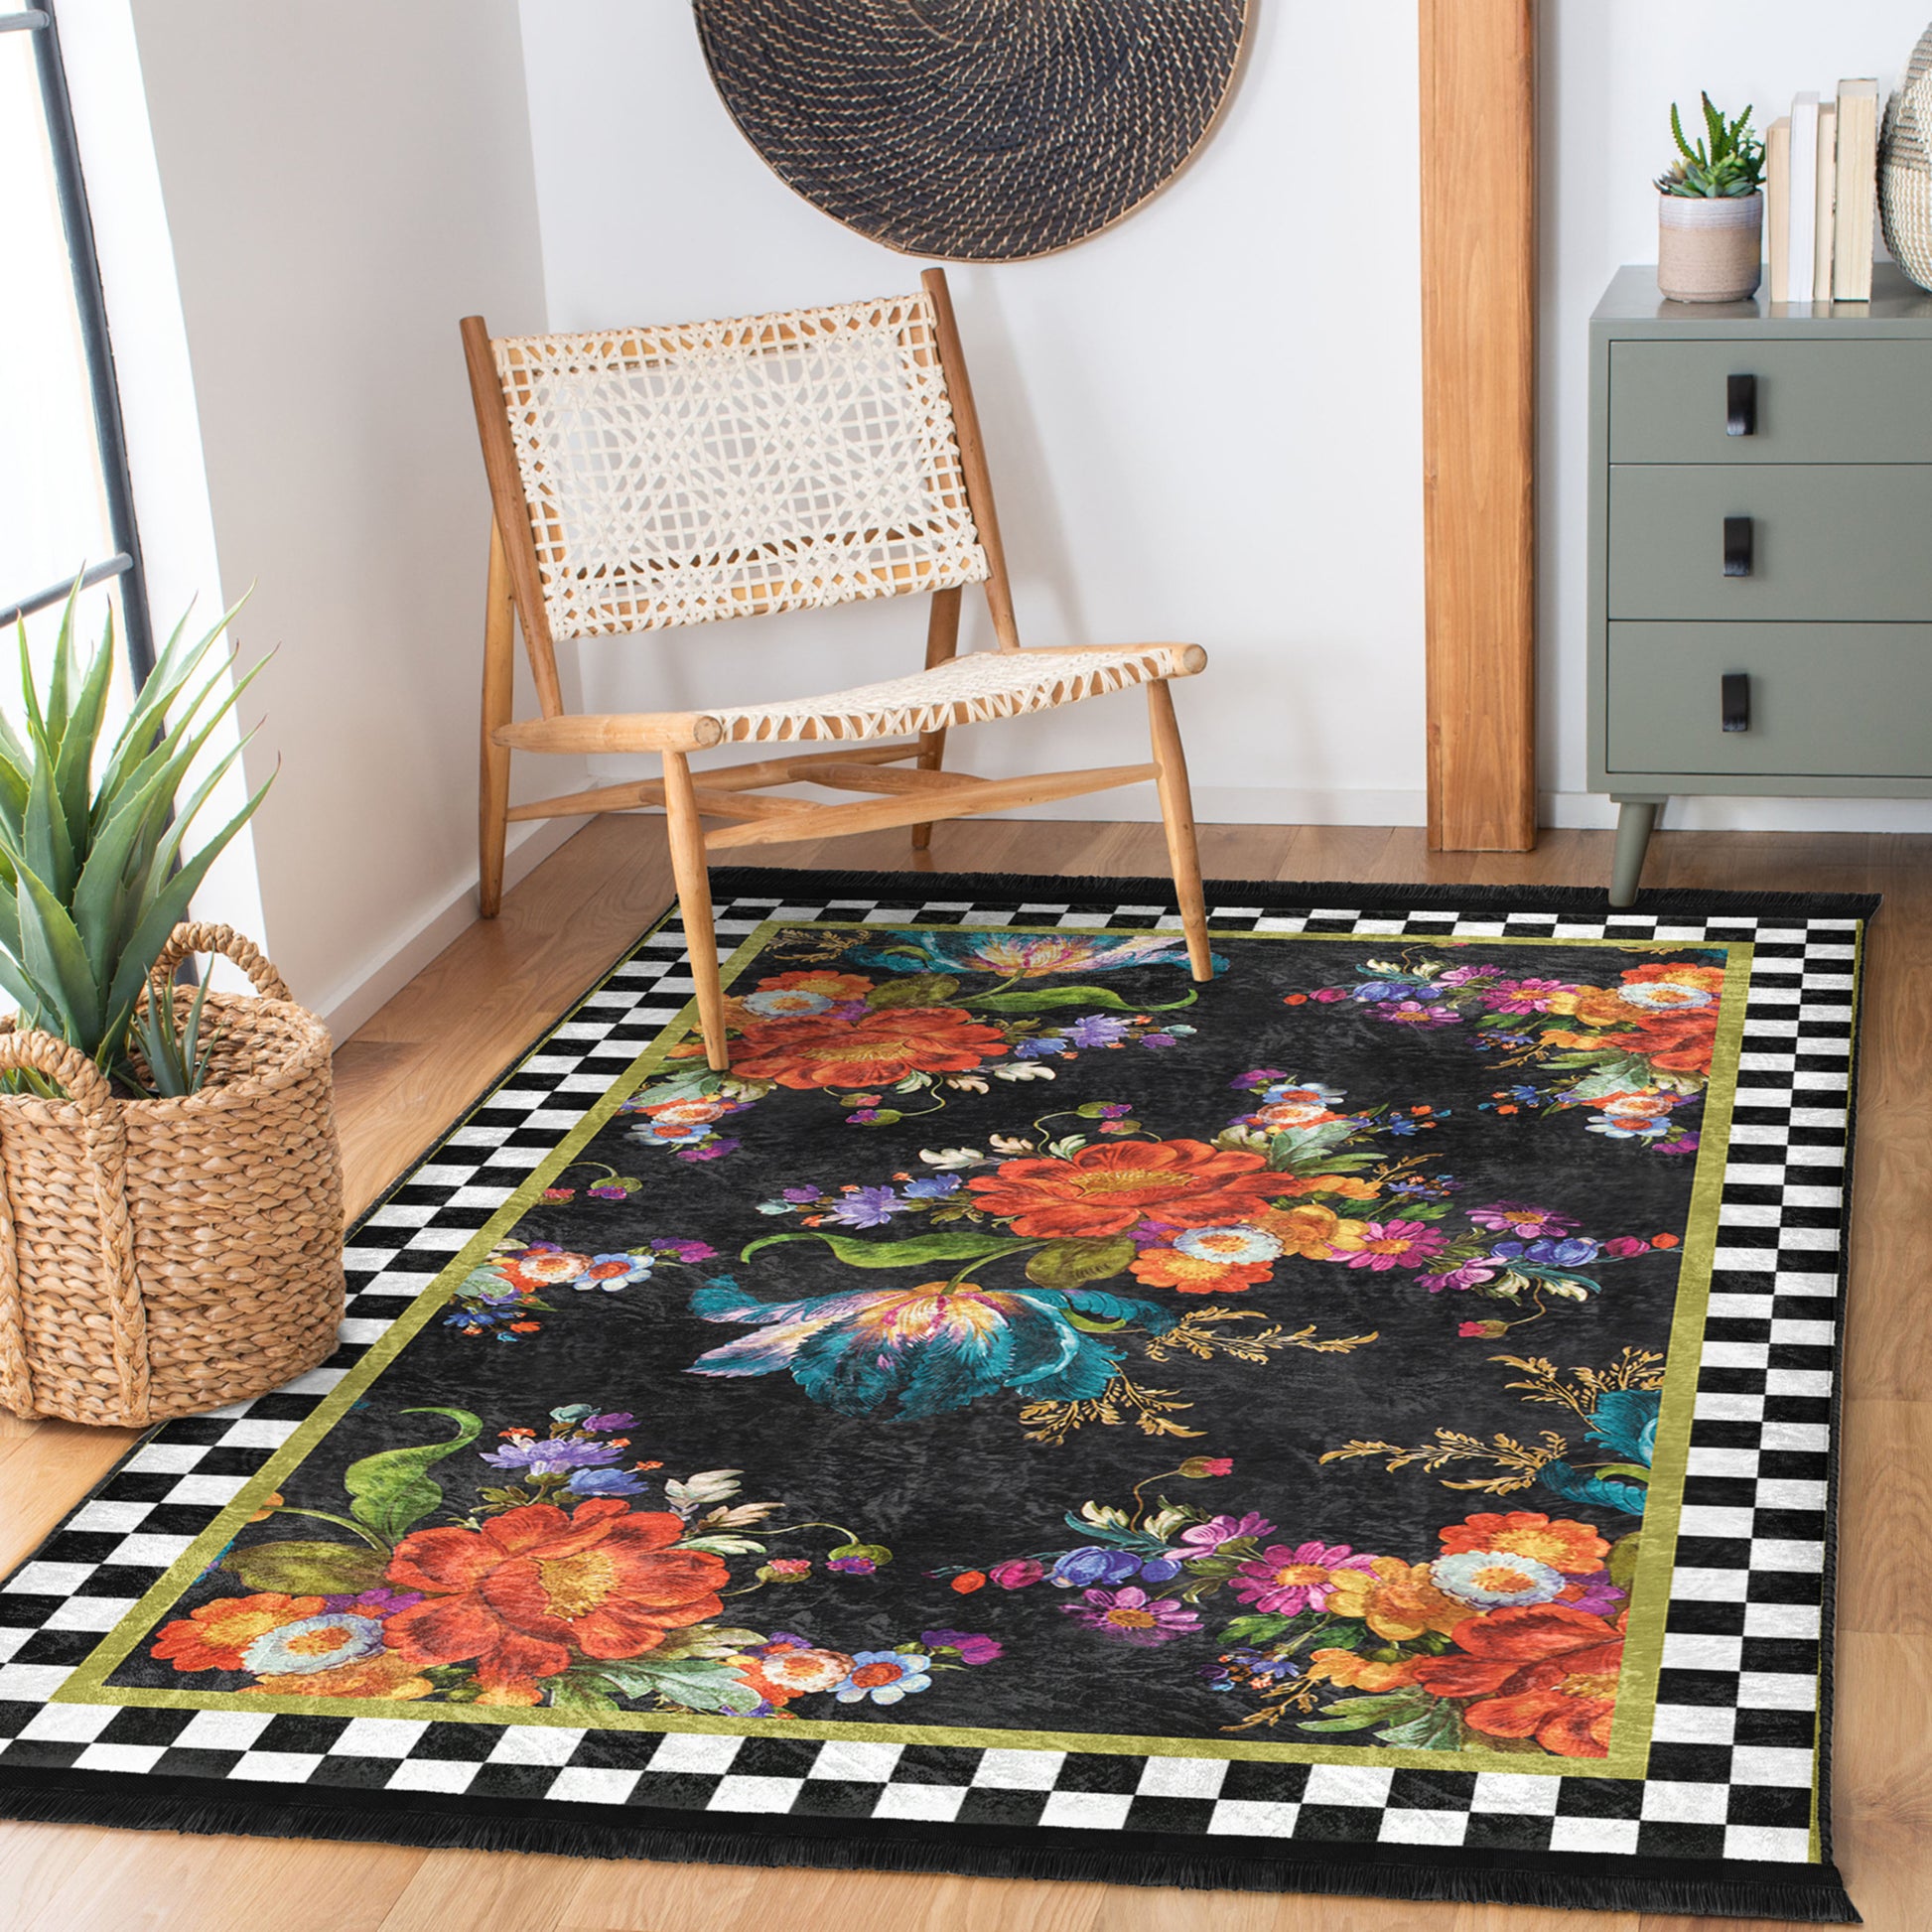 Floral Checkered Patterned Floor Rug - Dining Area